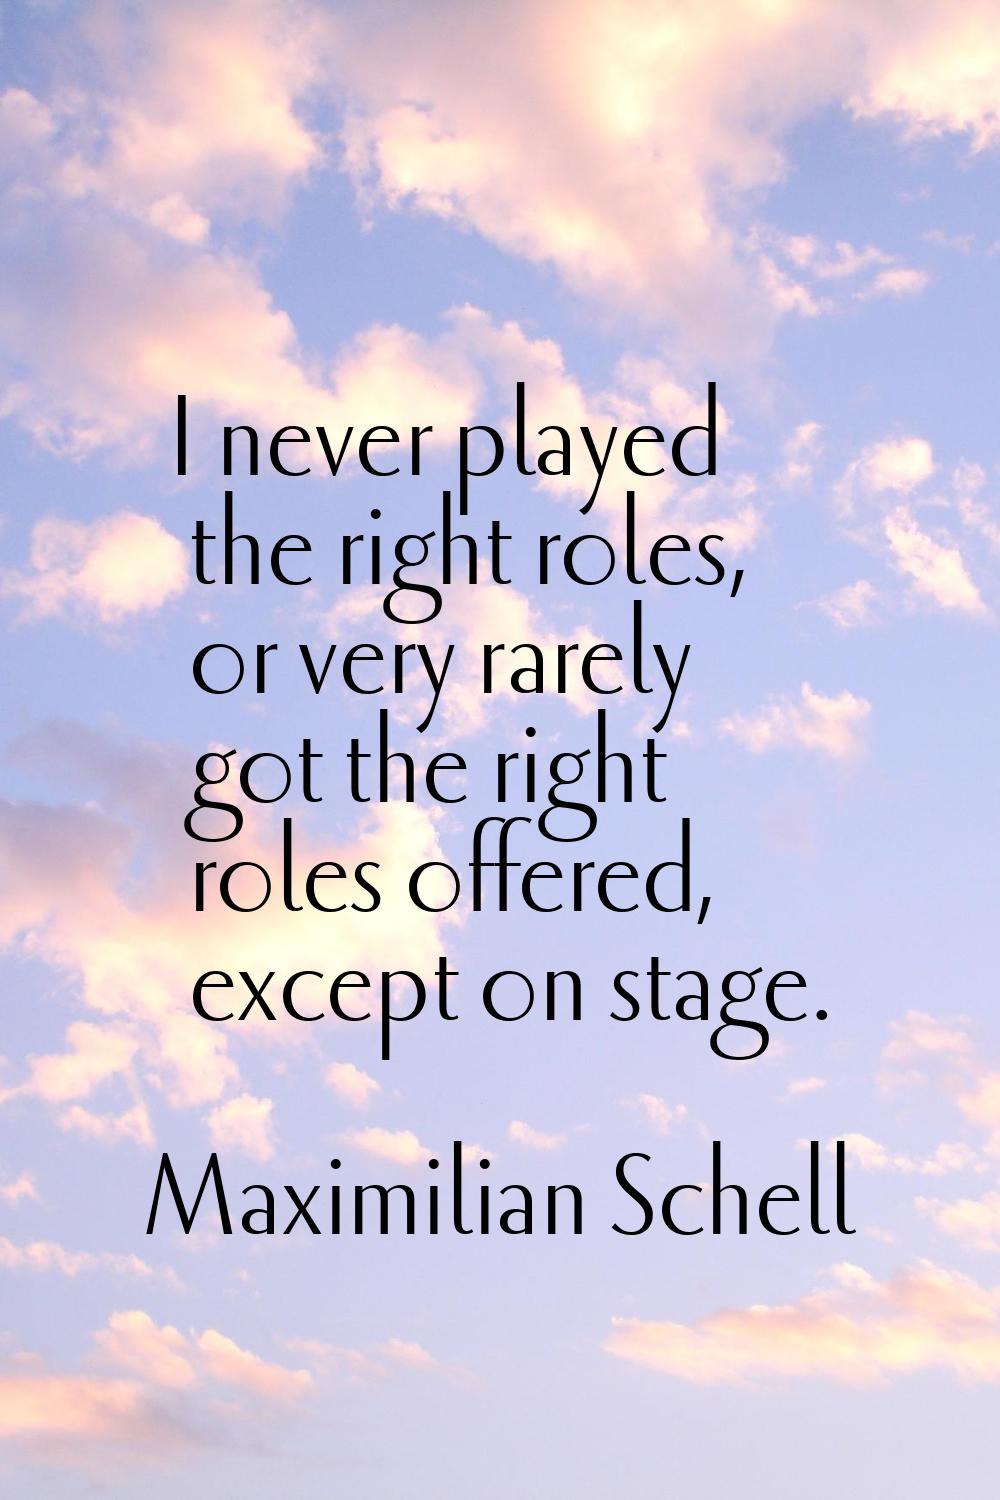 I never played the right roles, or very rarely got the right roles offered, except on stage.